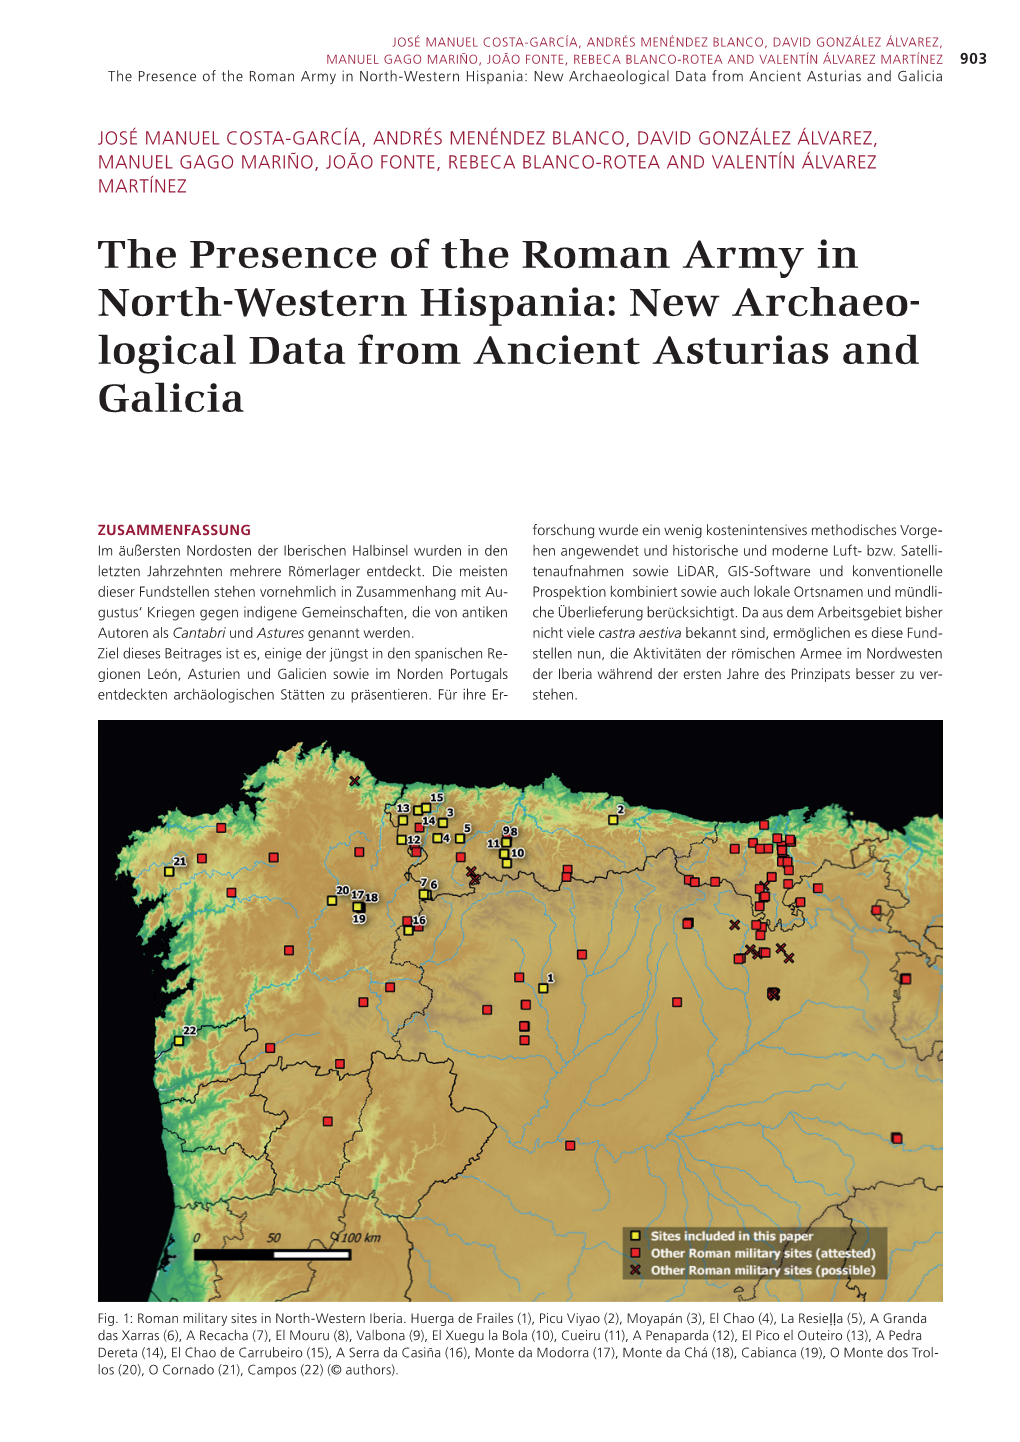 The Presence of the Roman Army in North-Western Hispania: New Archaeological Data from Ancient Asturias and Galicia